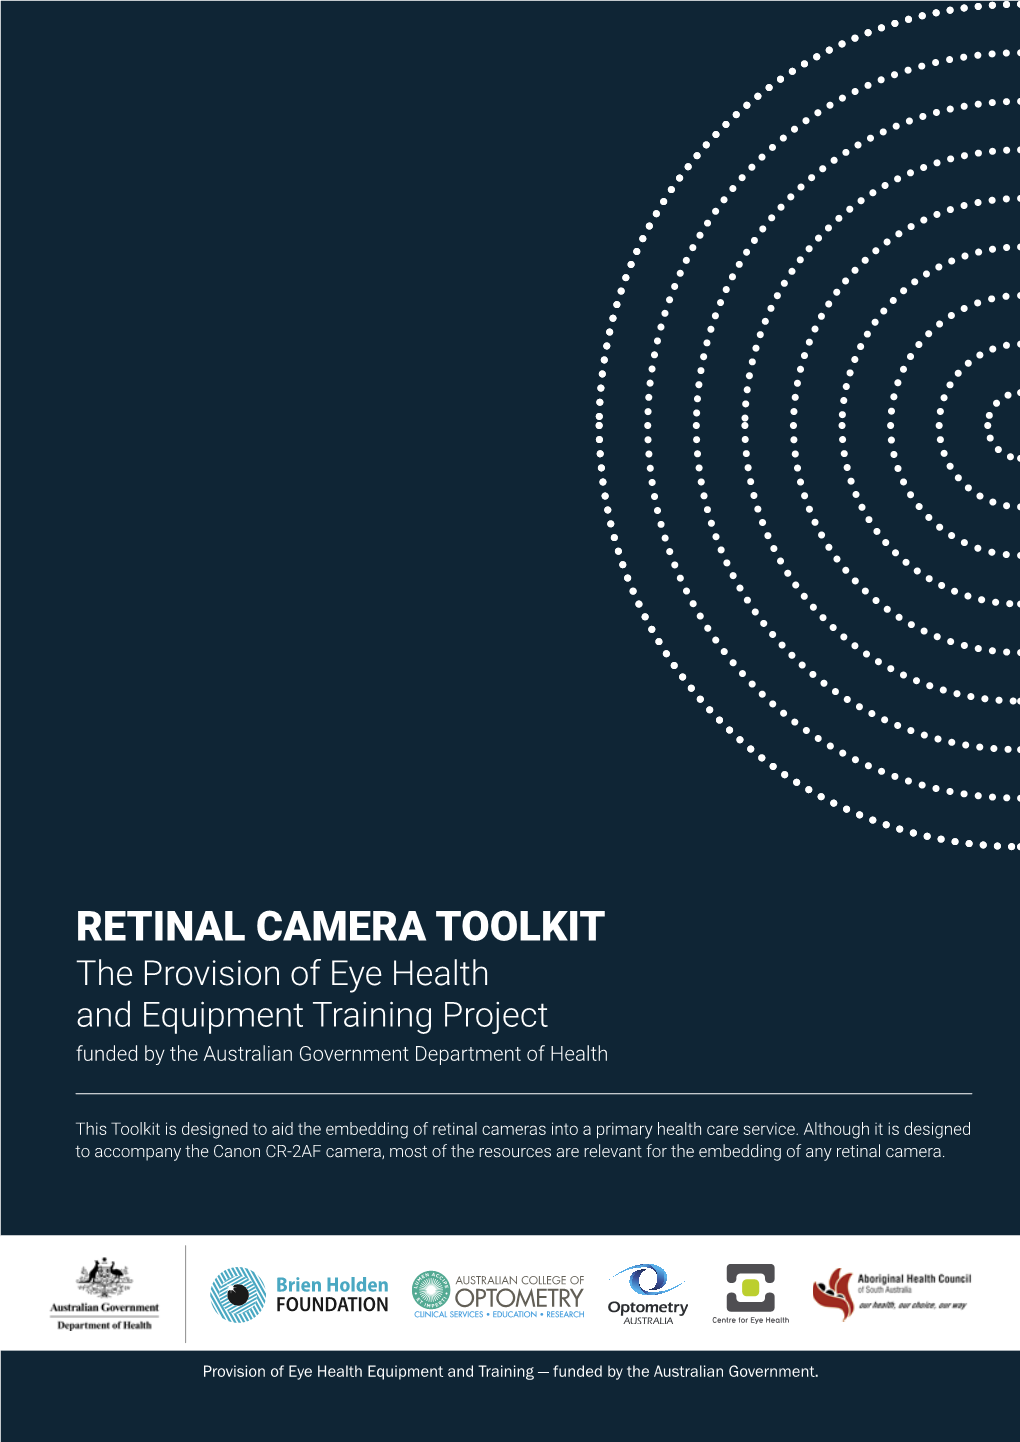 RETINAL CAMERA TOOLKIT the Provision of Eye Health and Equipment Training Project Funded by the Australian Government Department of Health